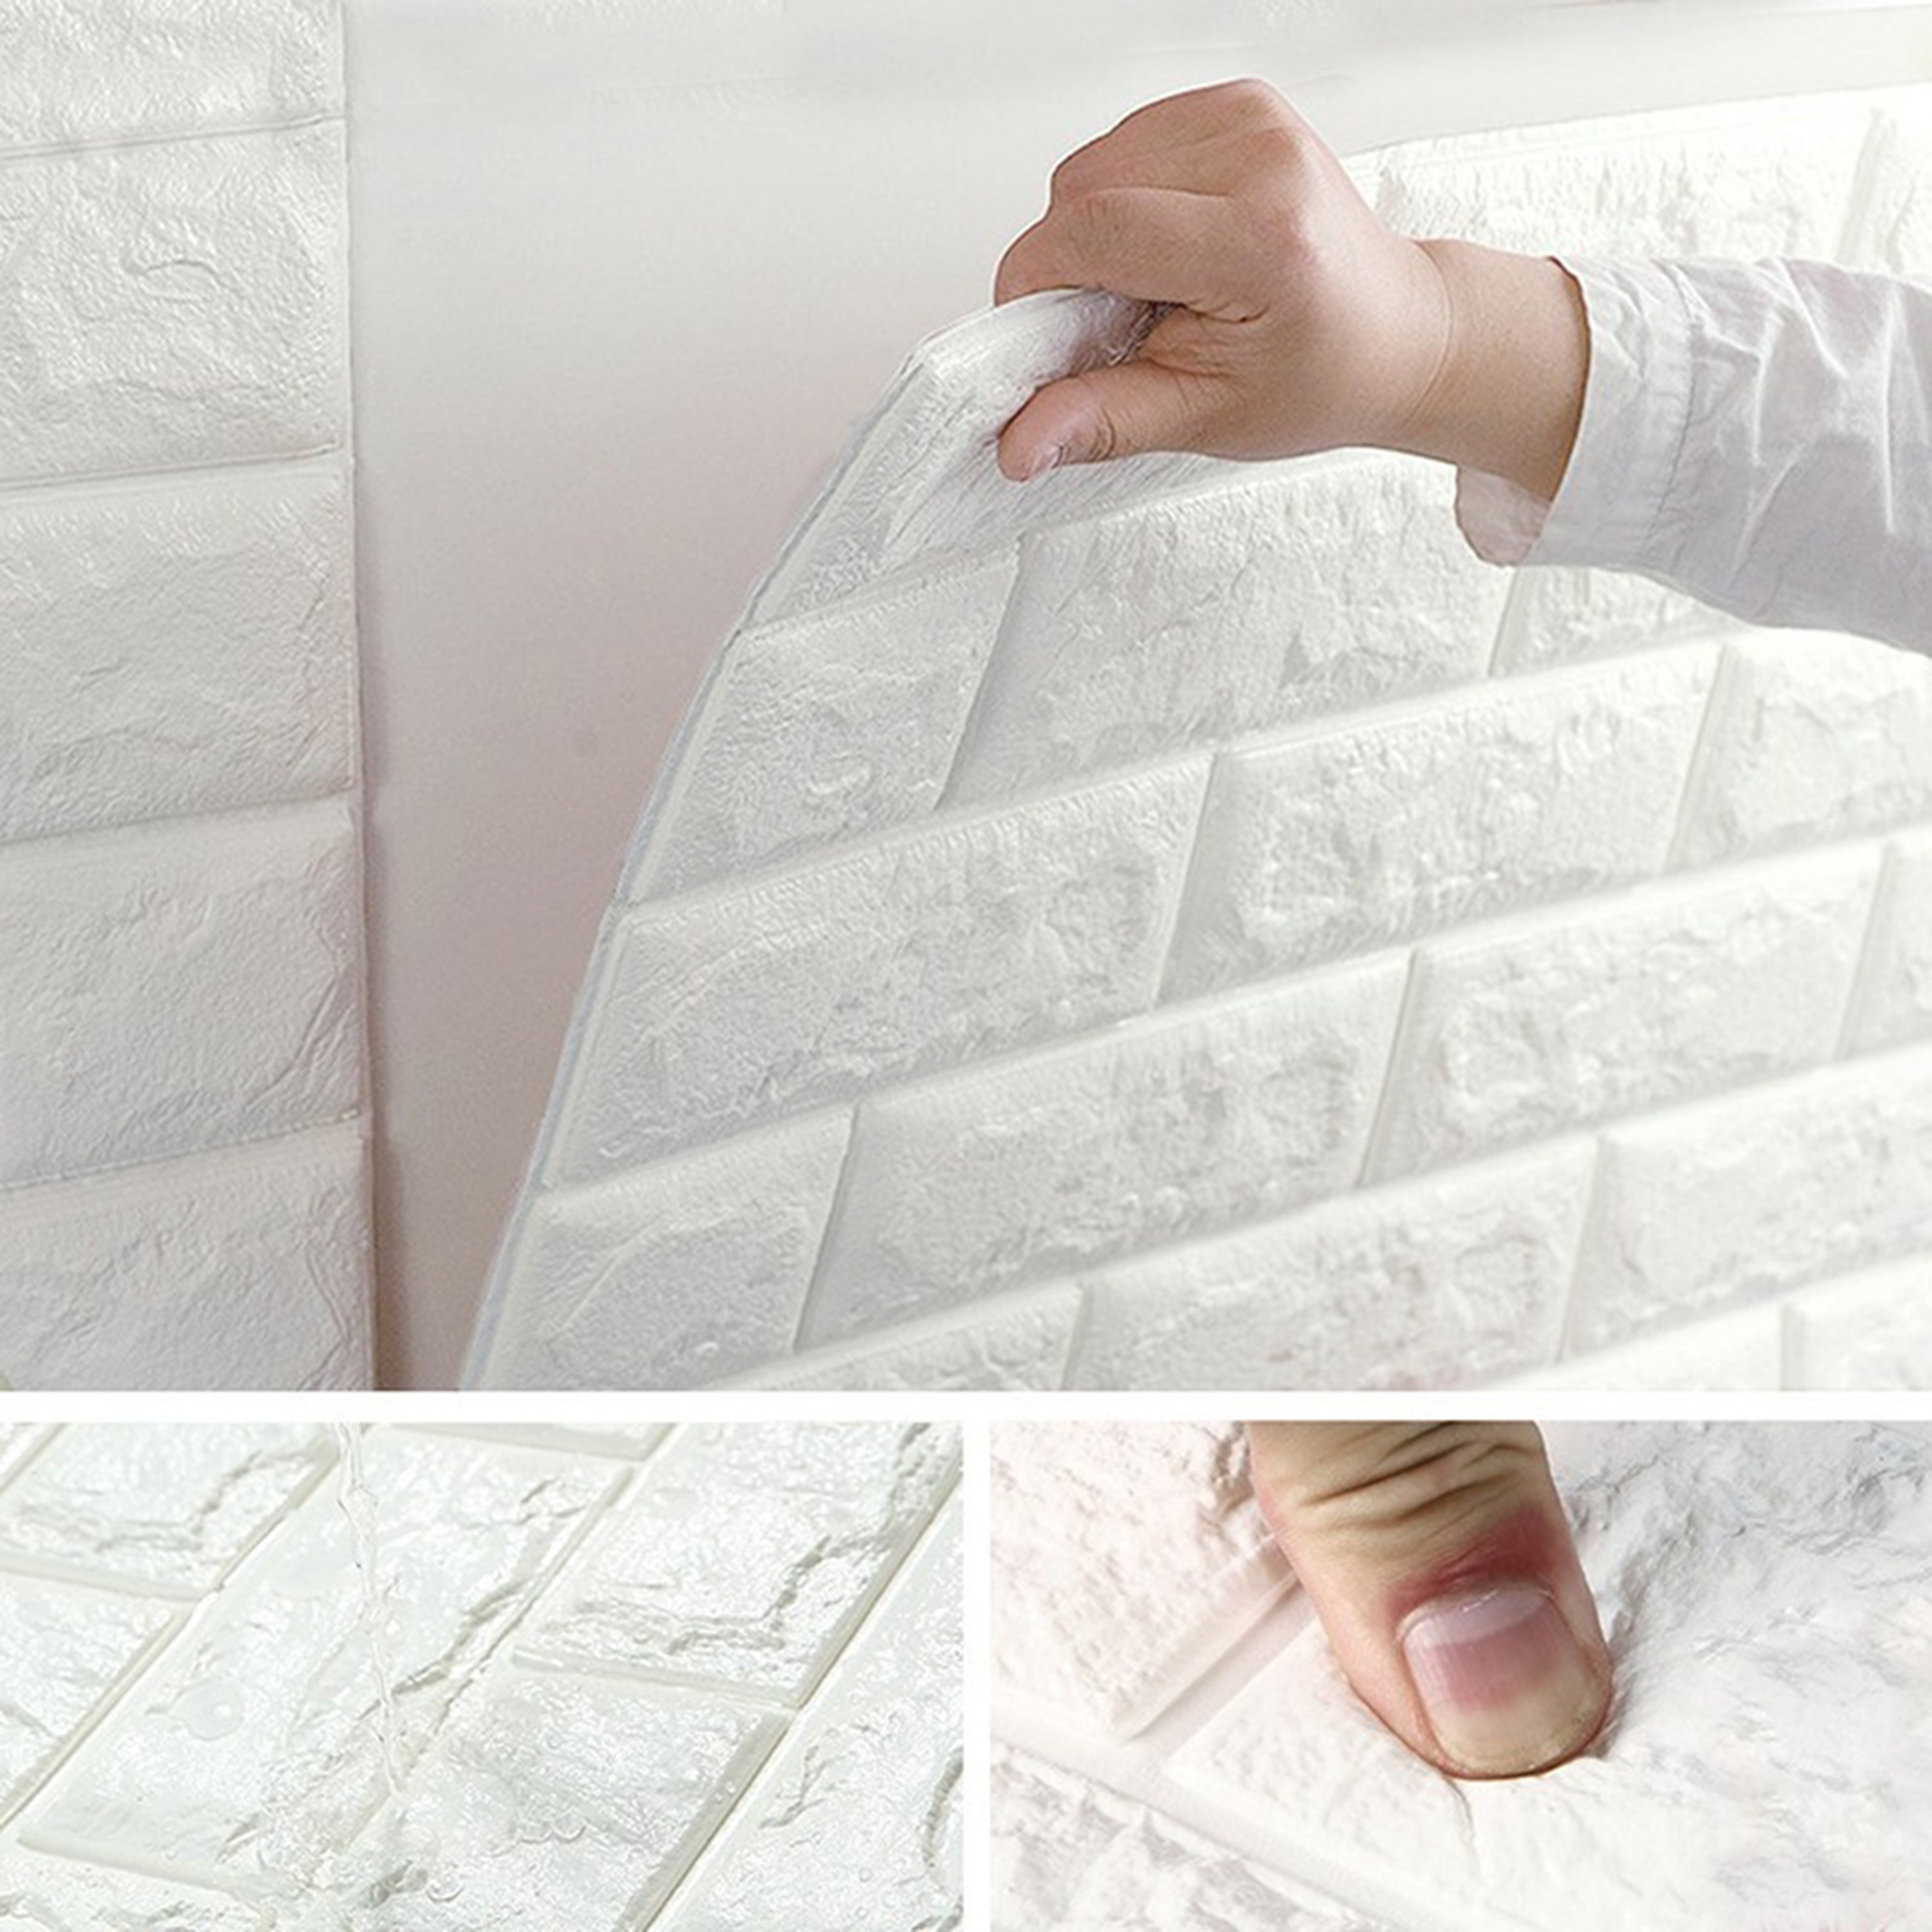 White Foam Brick 3D Wall Panels Peel and Stick Wallpaper Adhesive Textured Brick Tiles Waterproof Brick Pattern Wall Stickers Bedroom Living Room Background Decorative for Home Decor - image 5 of 7